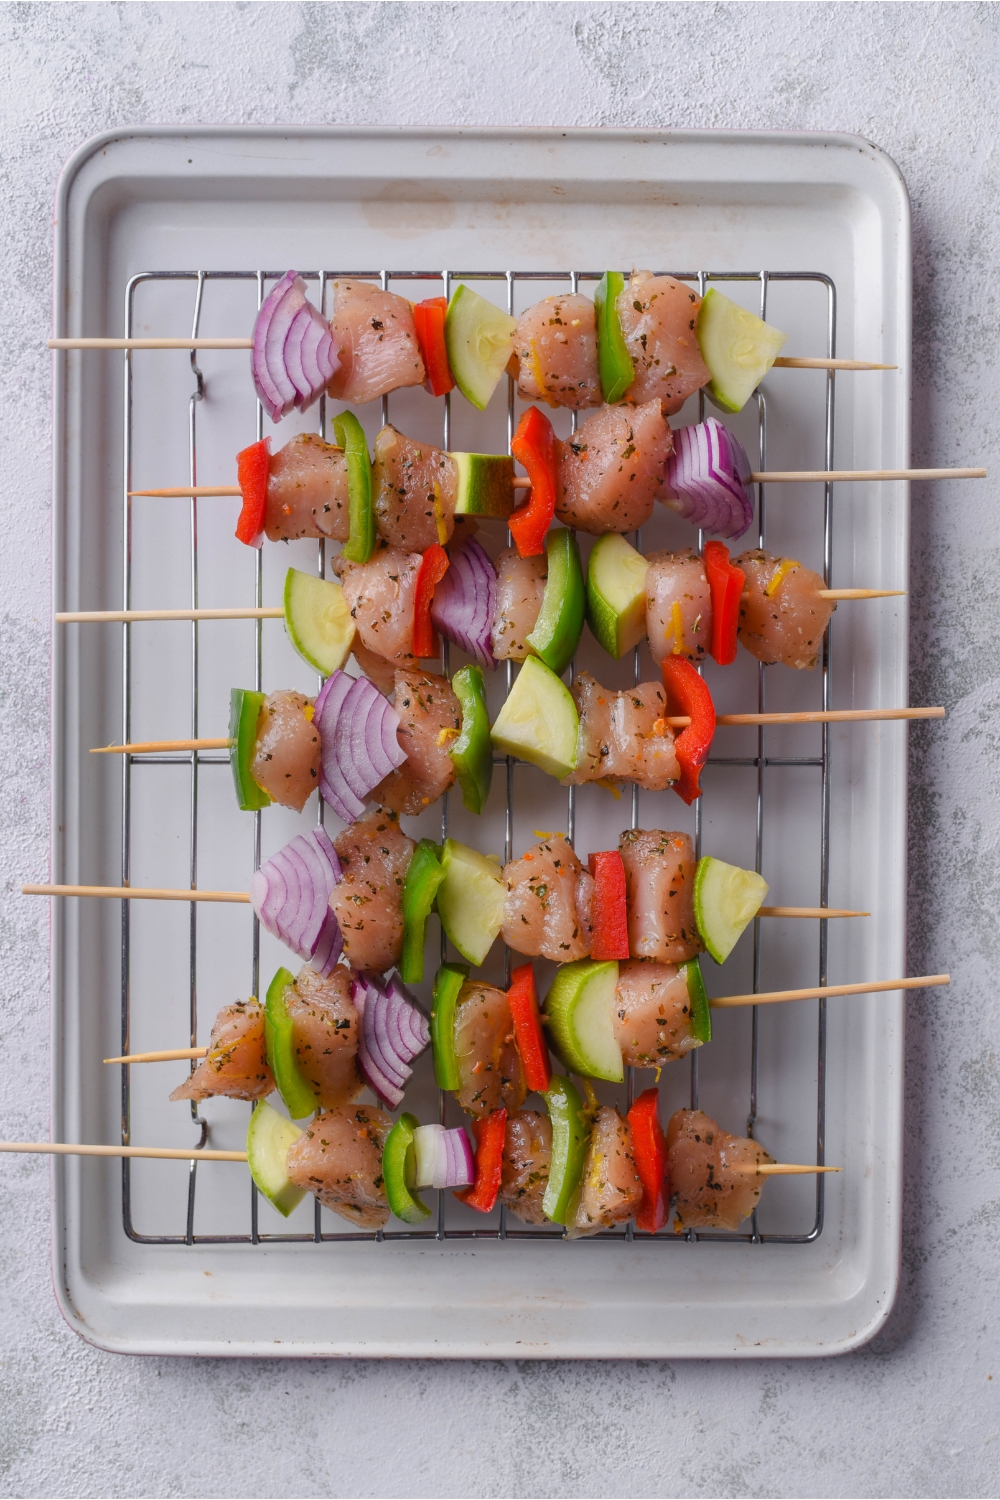 Six uncooked skewers of marinated chicken and vegetables on a wire rack atop a baking sheet.